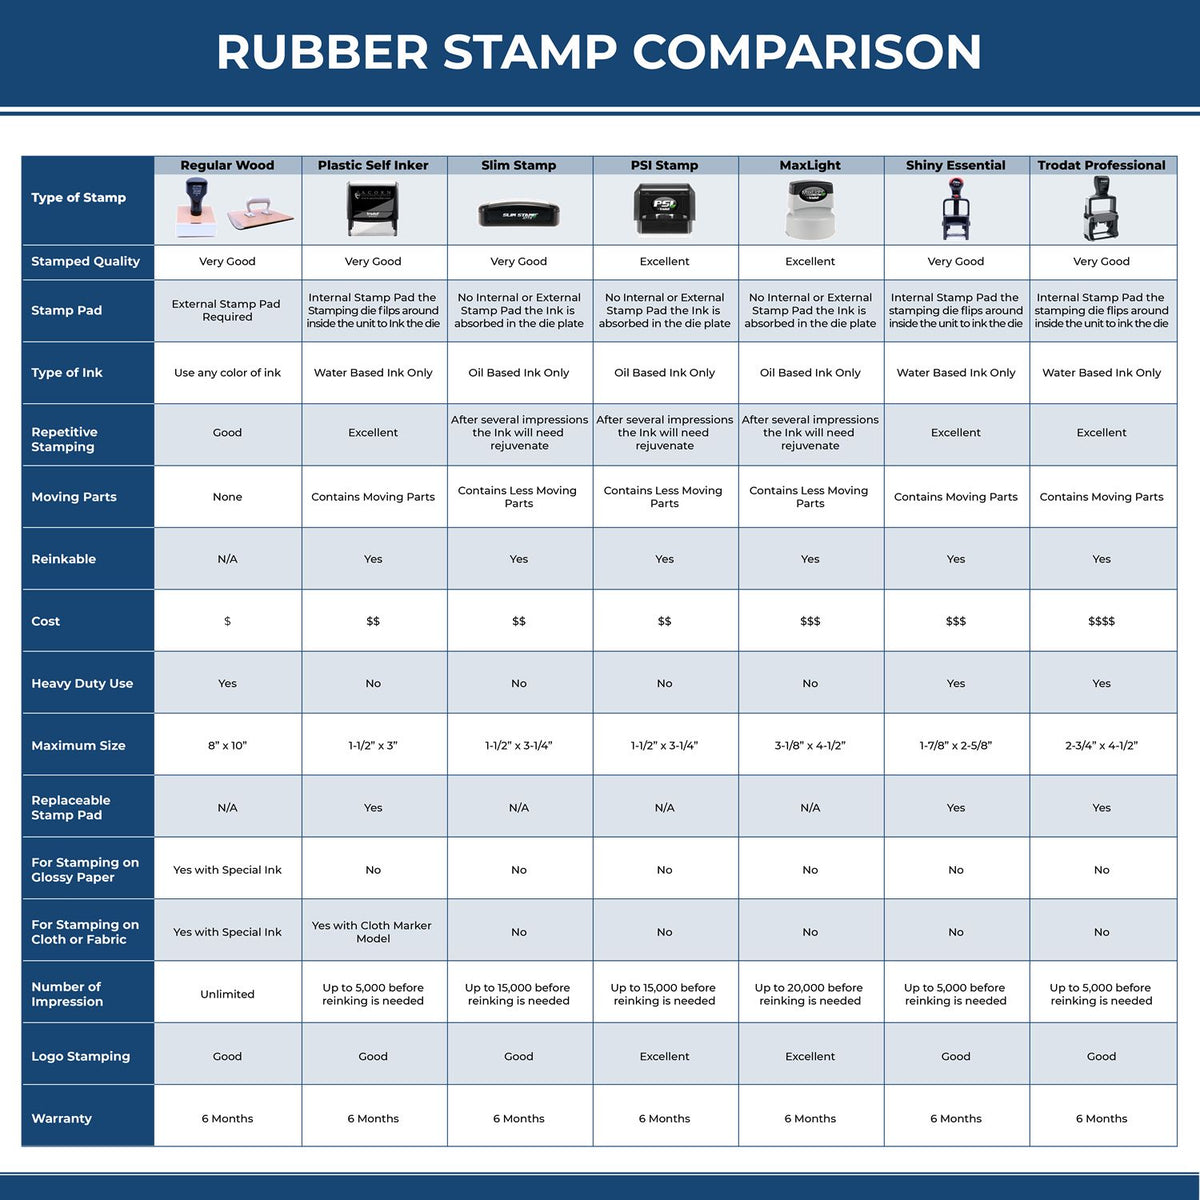 A comparison chart for the different types of mount models available for the PSI Utah Notary Stamp.